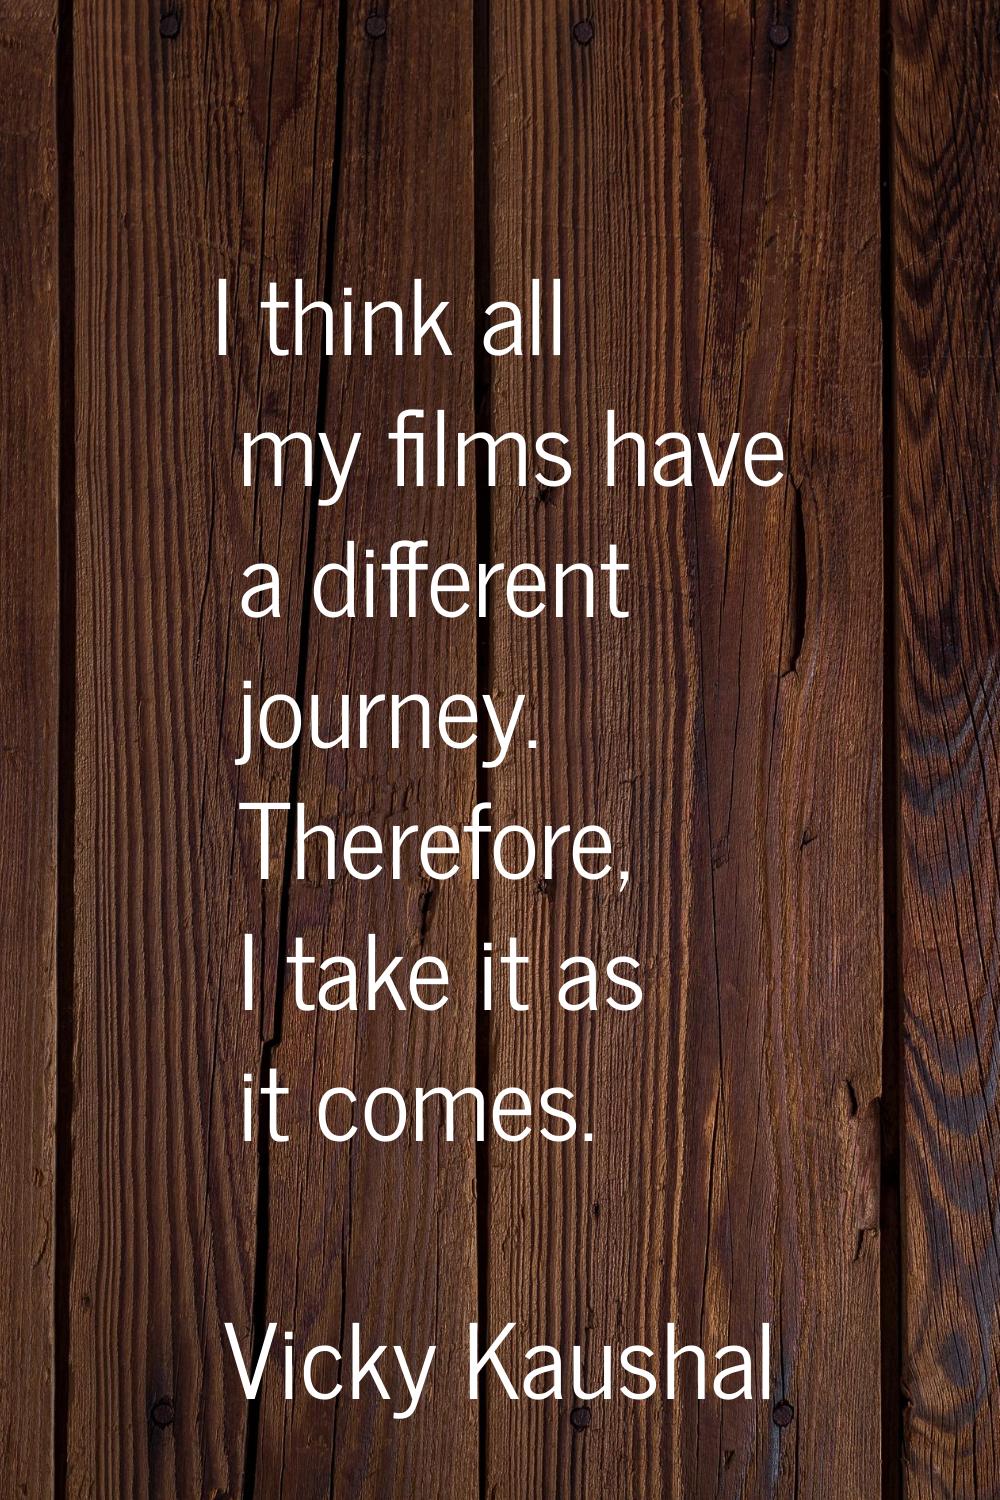 I think all my films have a different journey. Therefore, I take it as it comes.